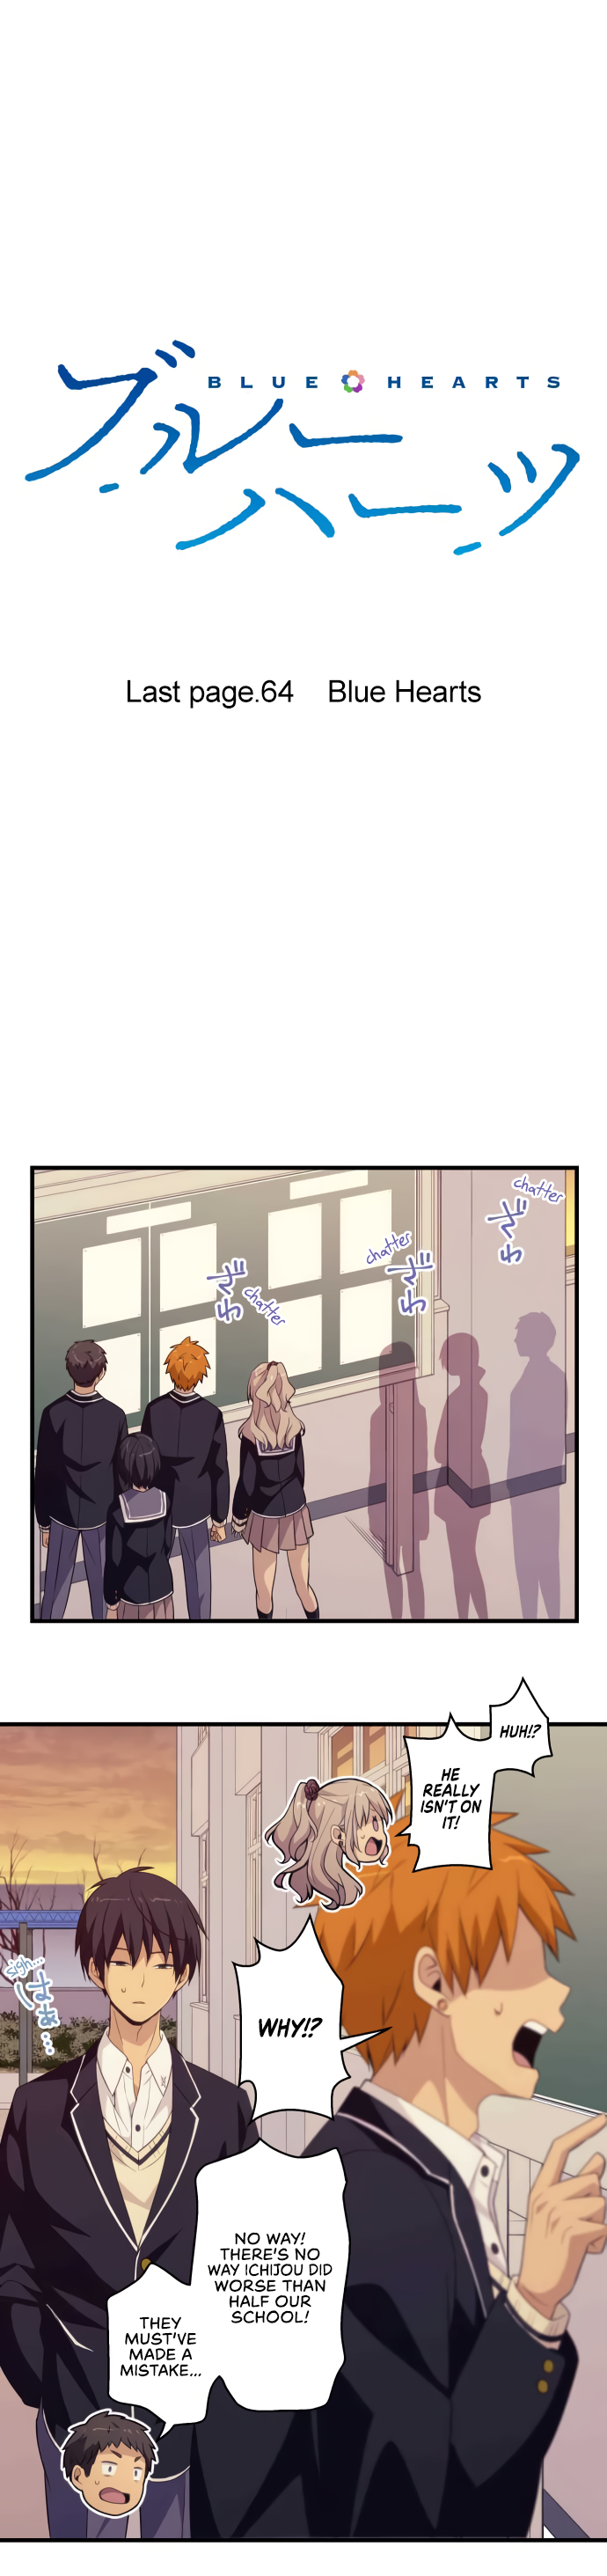 Blue Hearts Chapter 64: Blue Hearts - Picture 2